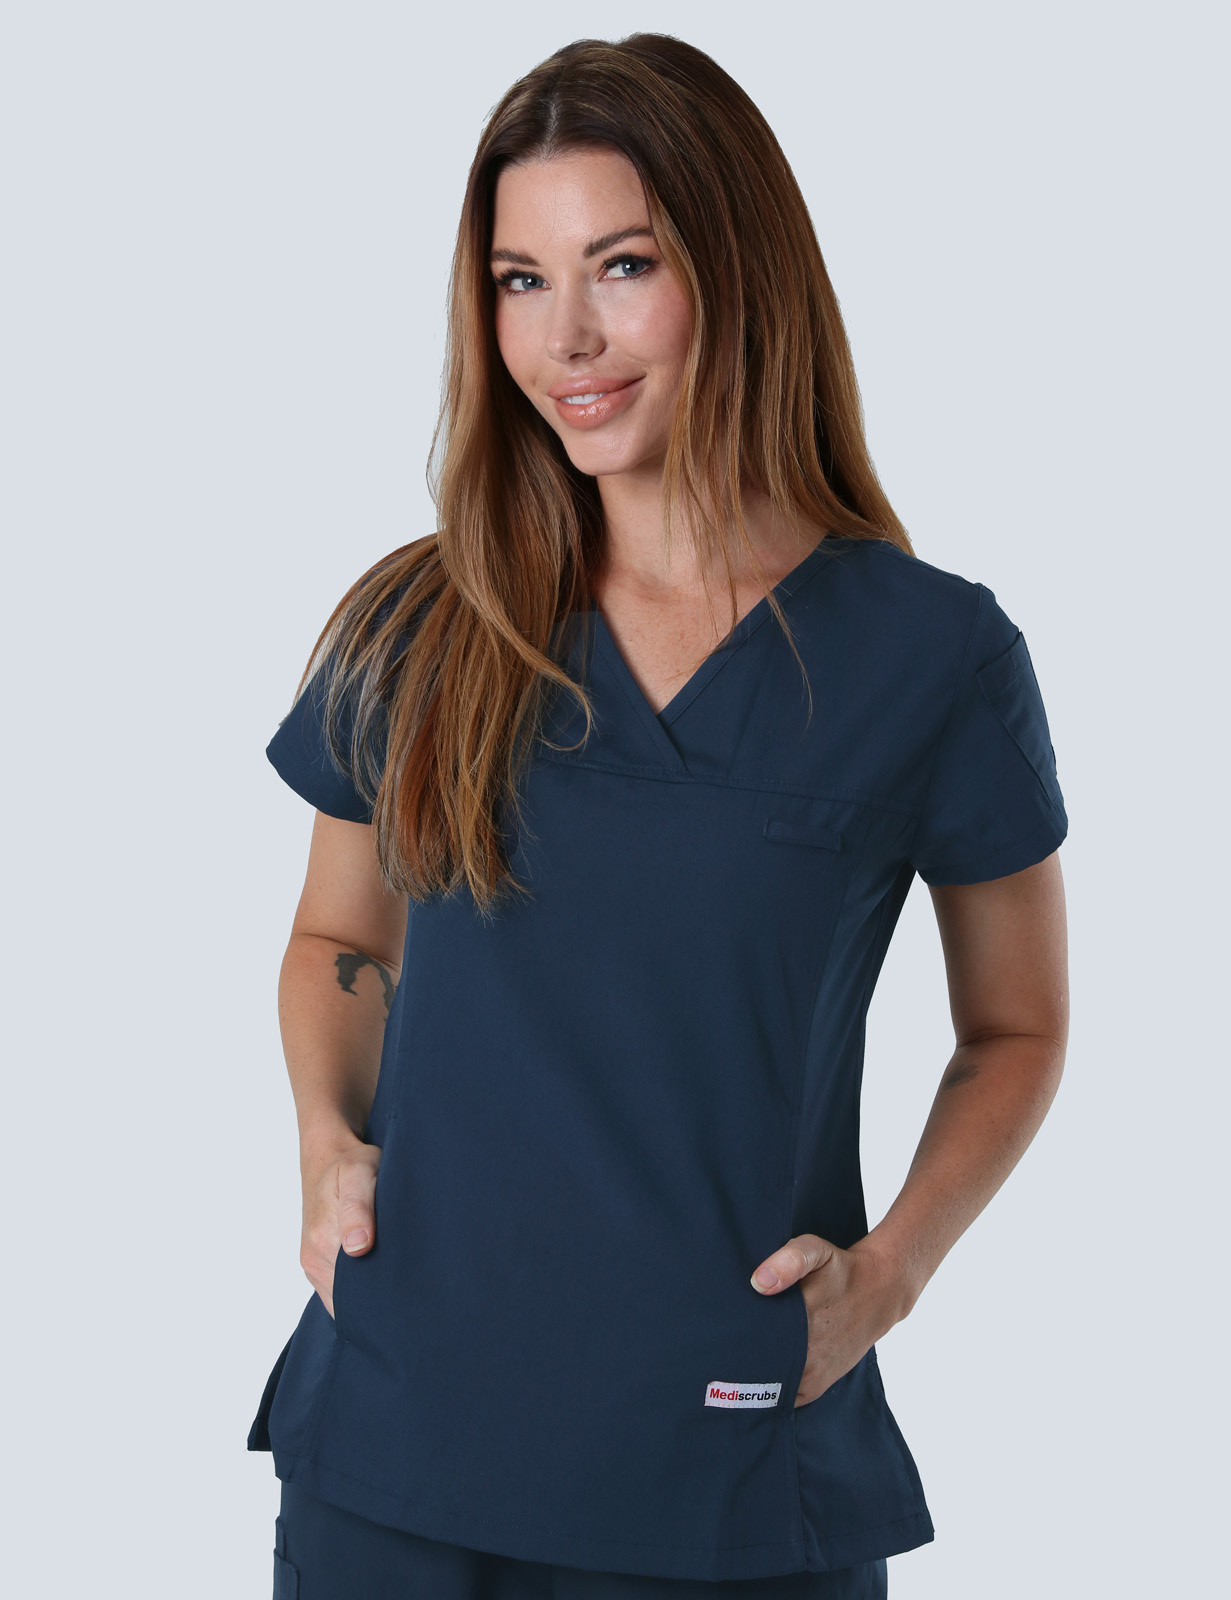 Frankston - AAAU/ANM (Women's Fit Solid Scrub Top and Cargo Pants in Navy incl Logos)